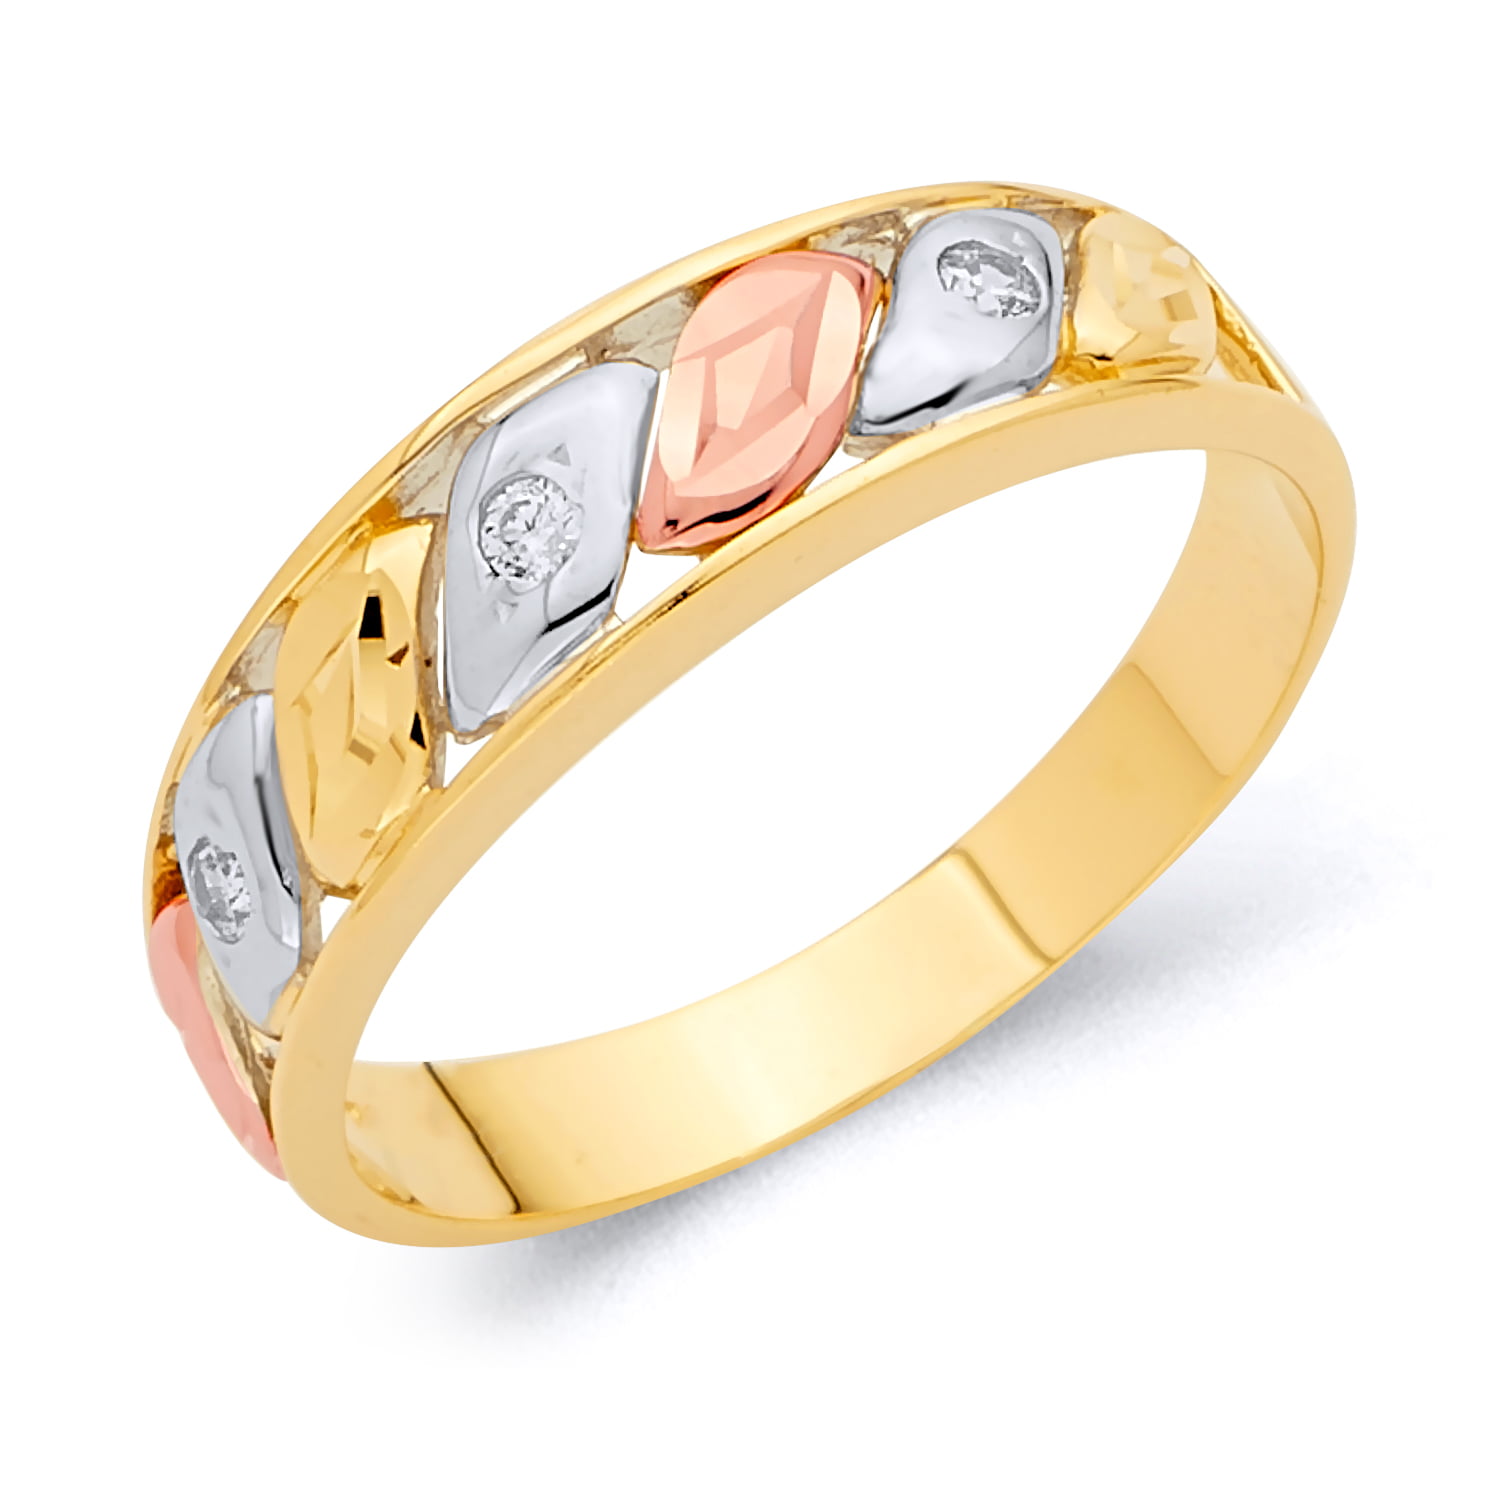 Wellingsale Mens 14K 3 Tri Color White Yellow and Rose/Pink Gold Polished Diamond Cut CZ Cubic Zirconia Wedding Ring Band 